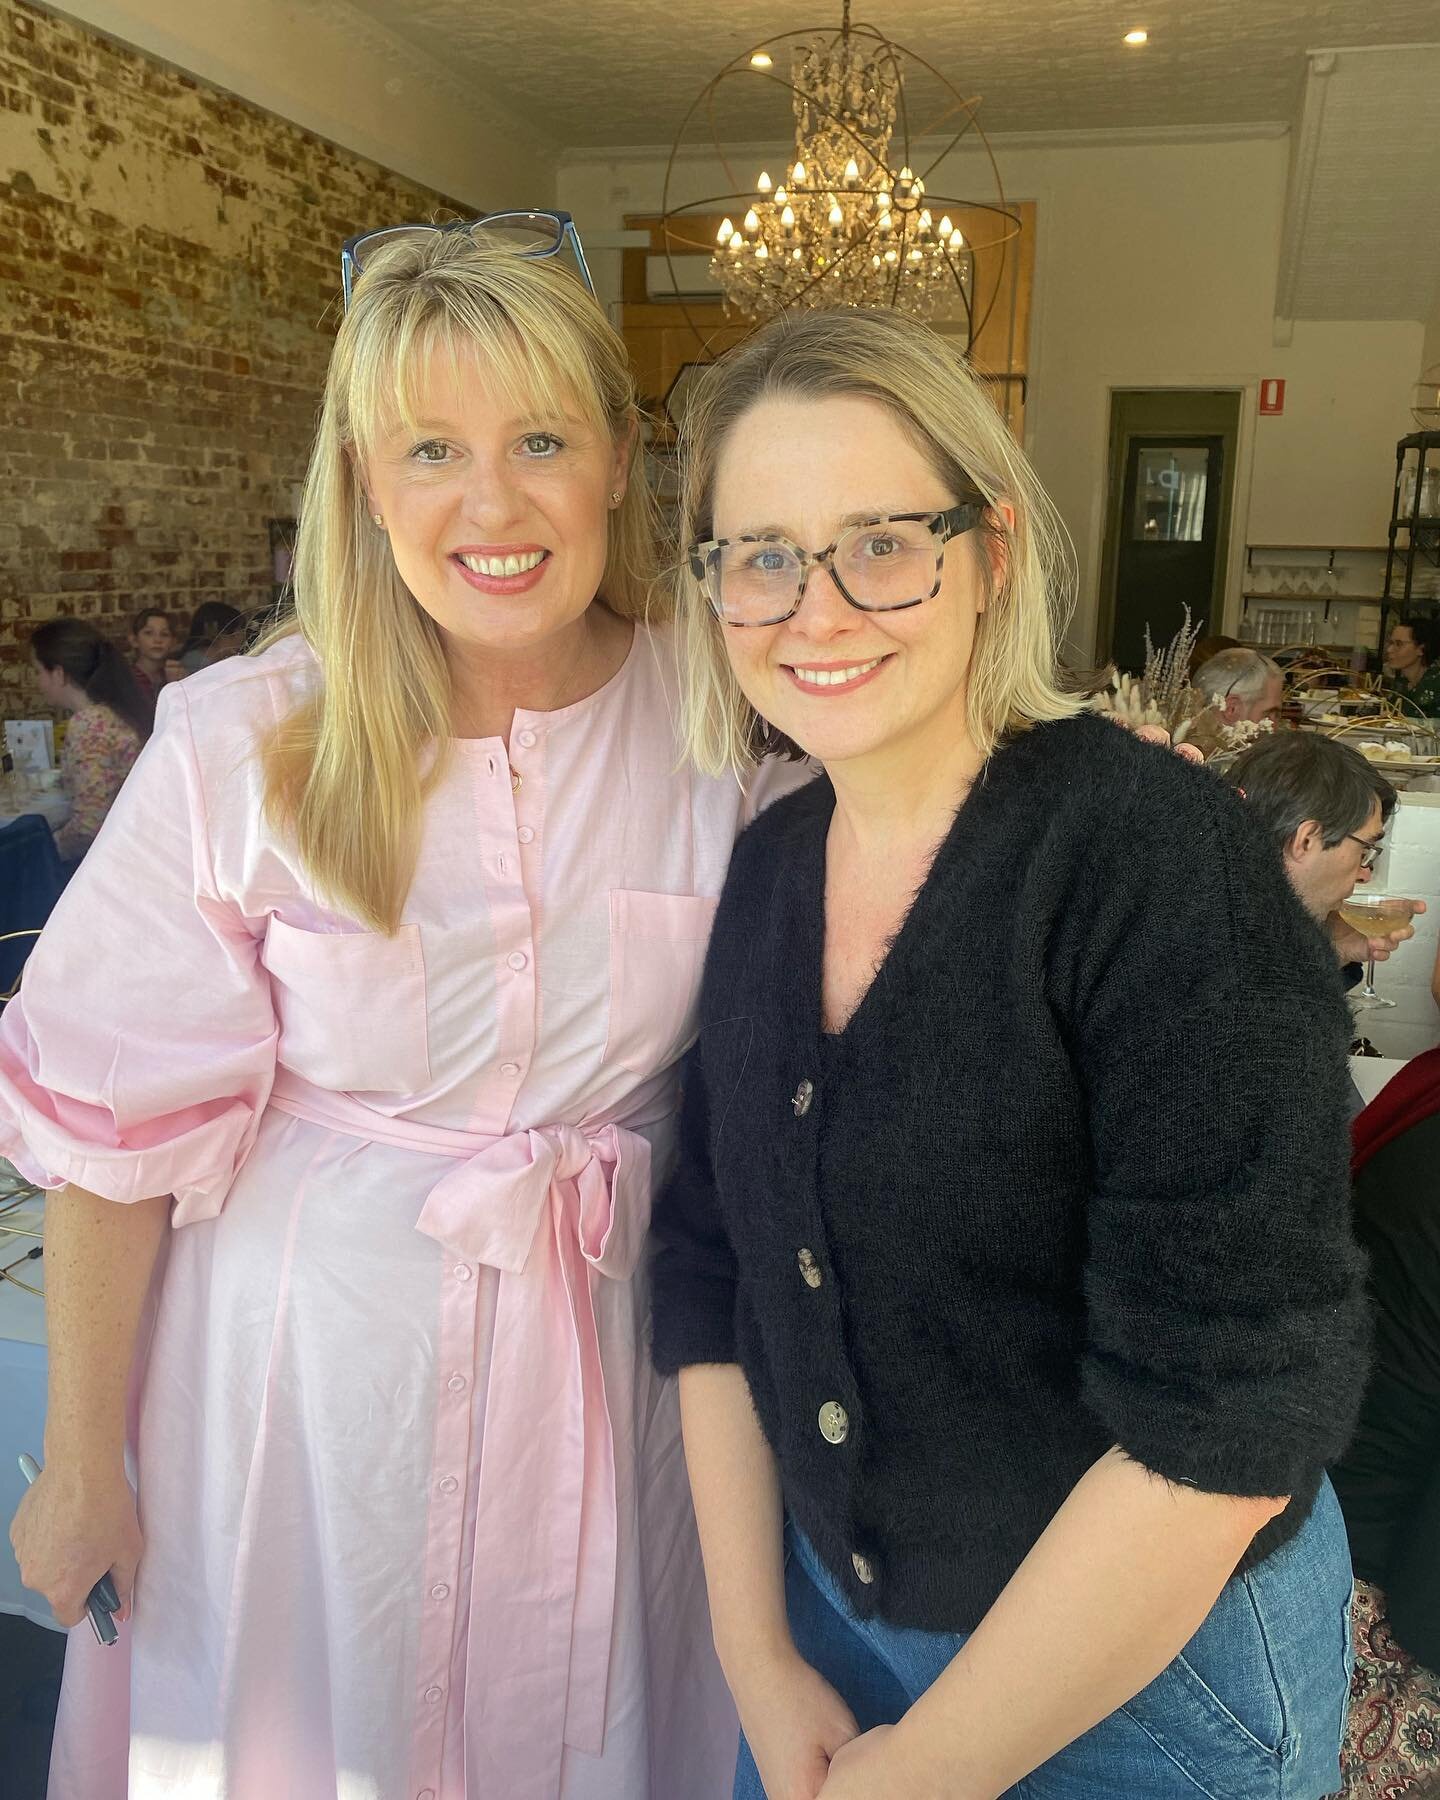 High tea with Jacqueline Harvey, combining two of my favorite things: KidLit and cake. My girls were starstruck and so was I. Thank you, Jacqueline!